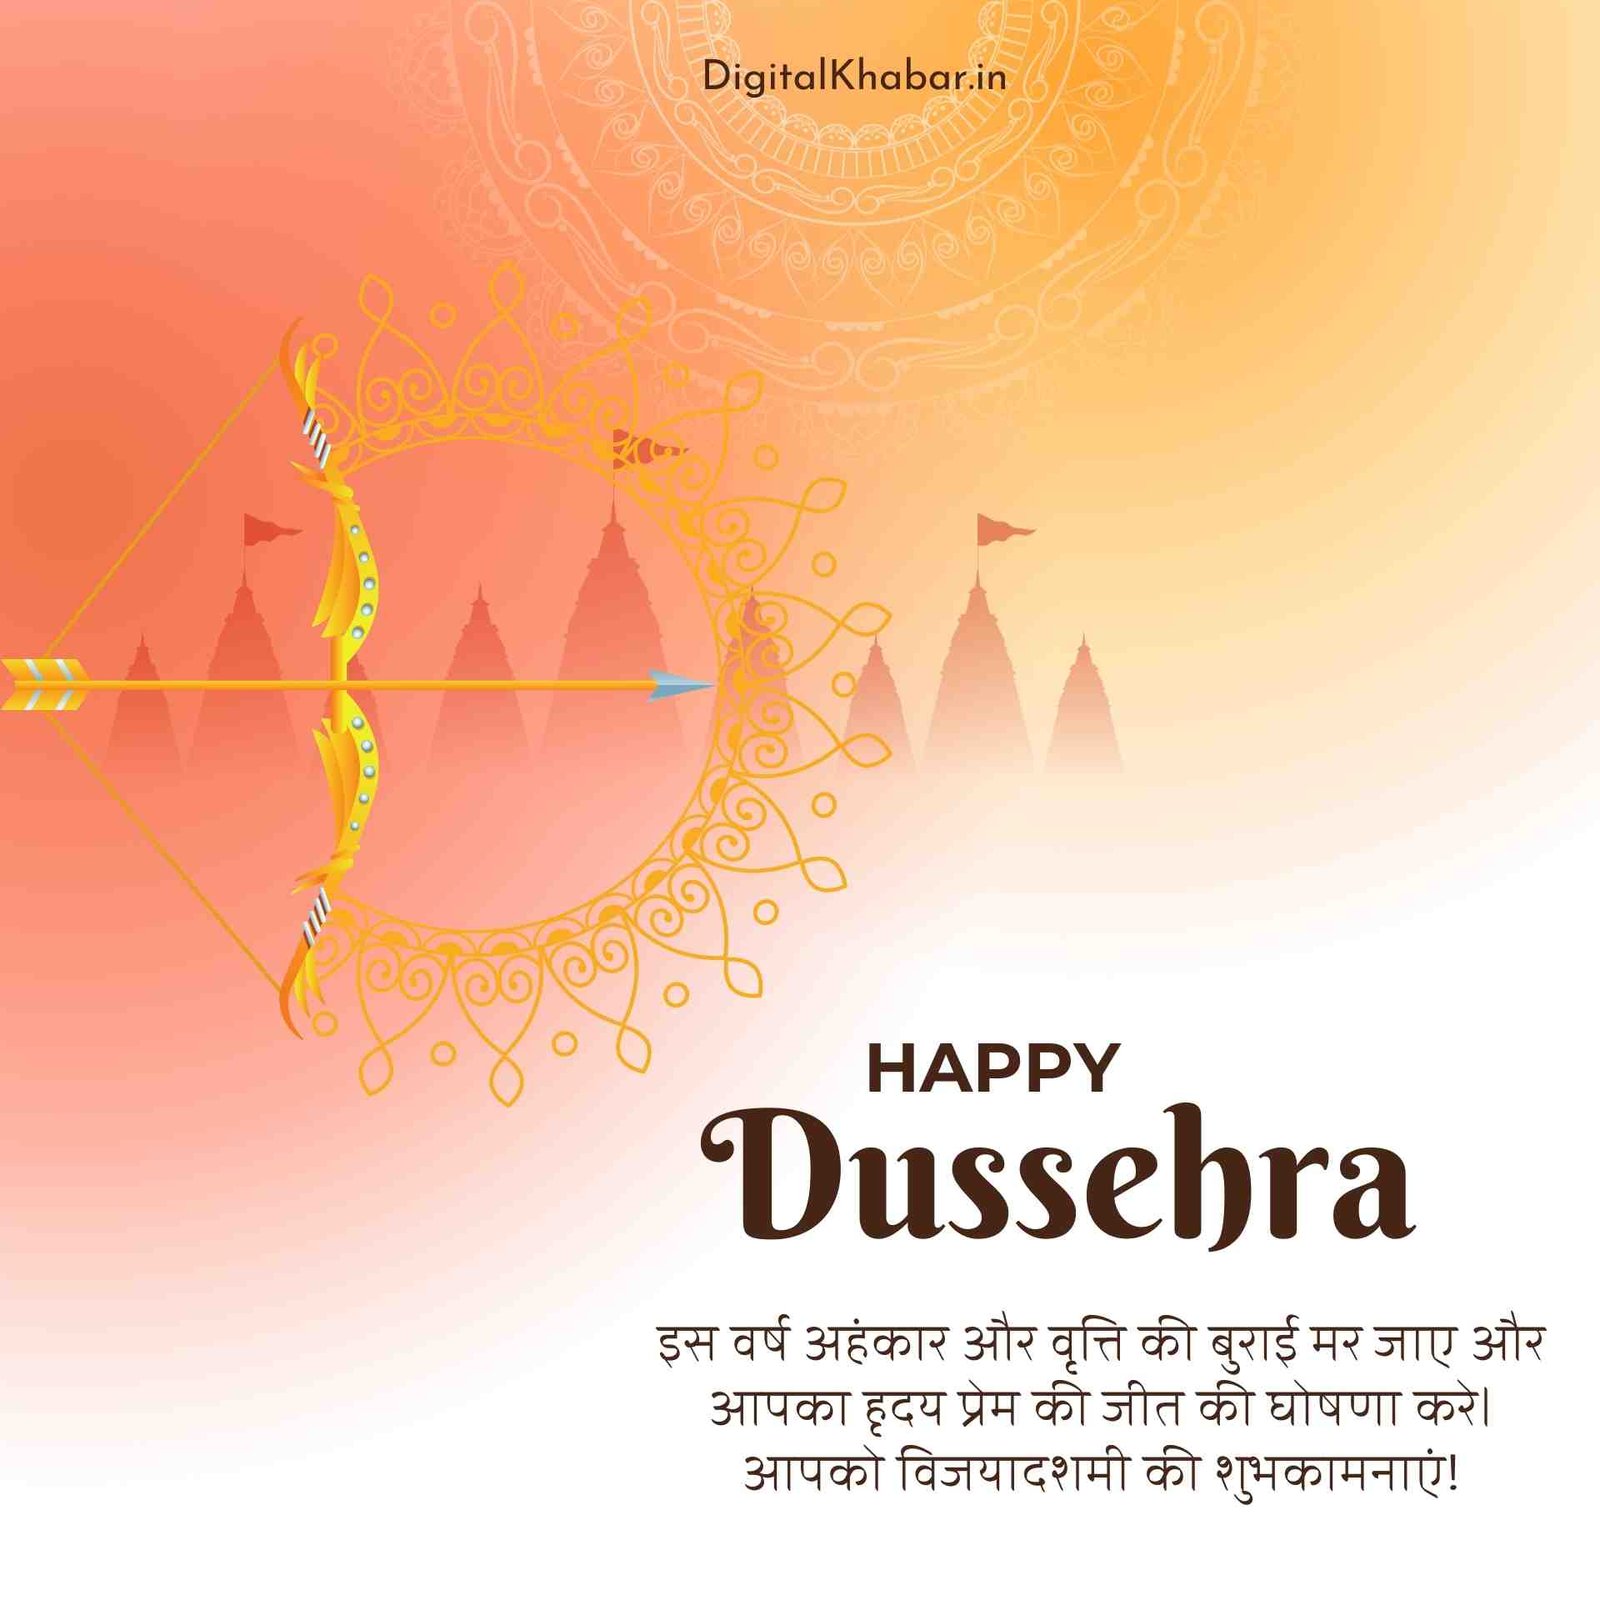 dussehra images for whatsapp status